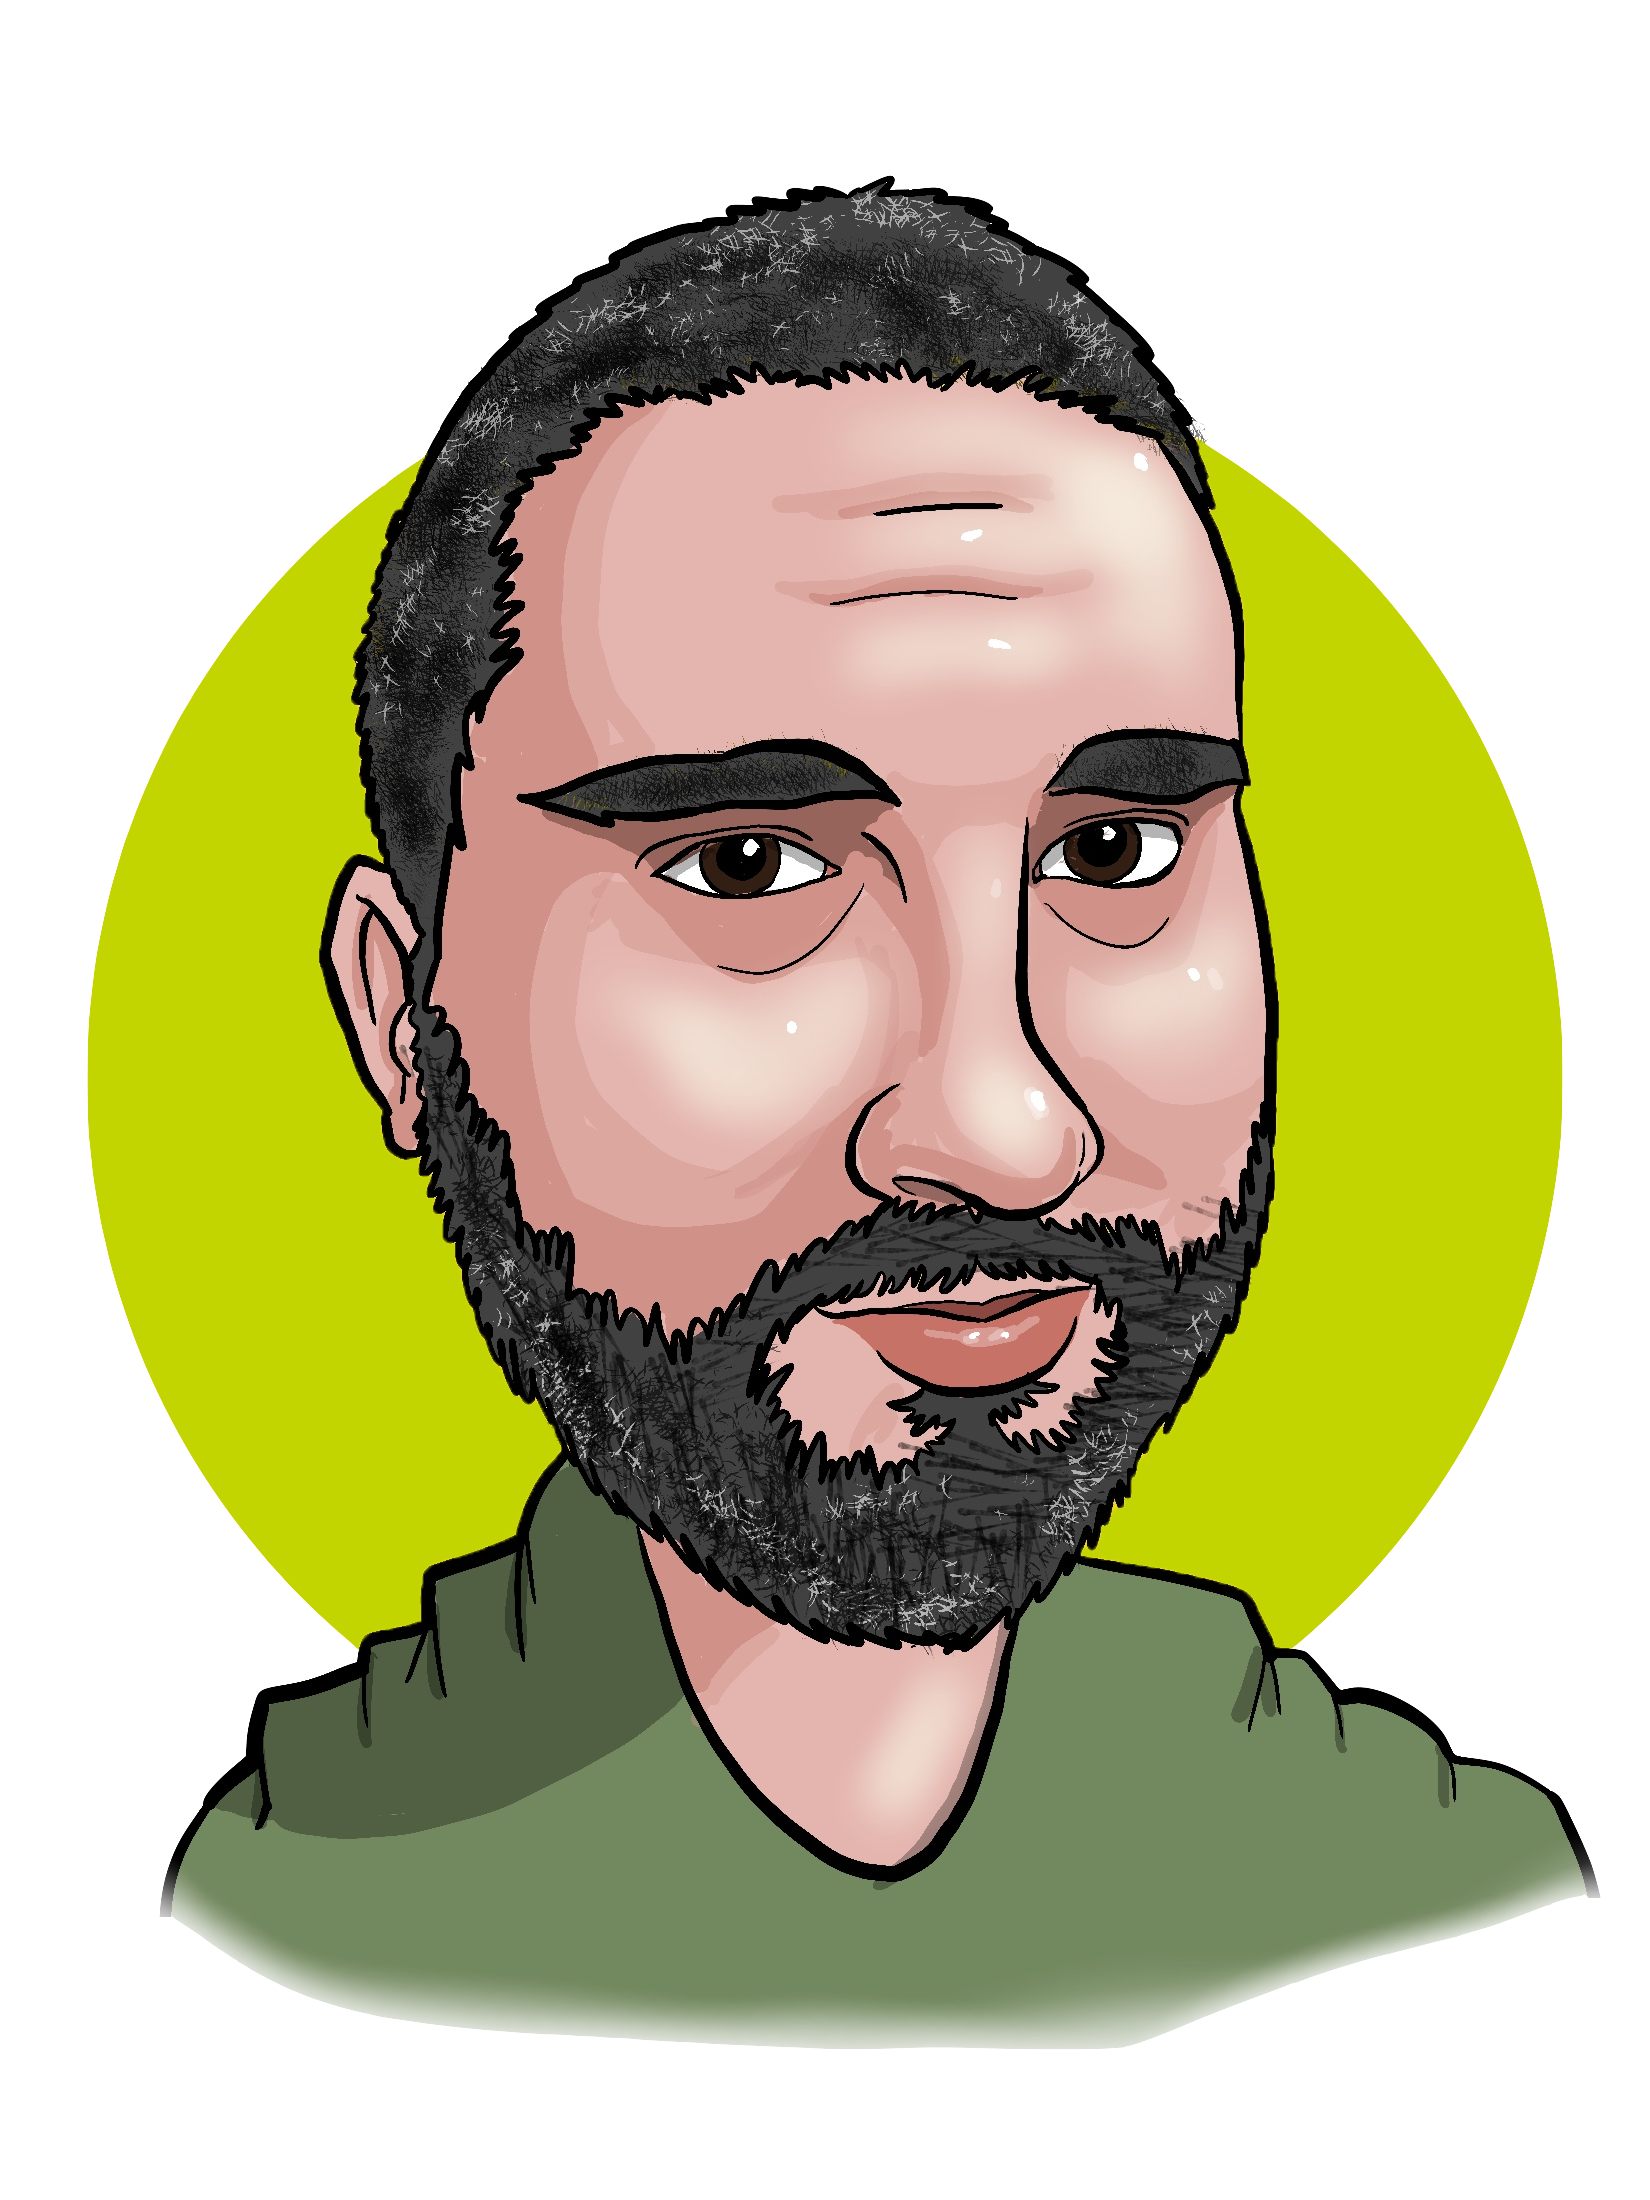 a caricature-style drawing of Chris Farkas's headshot